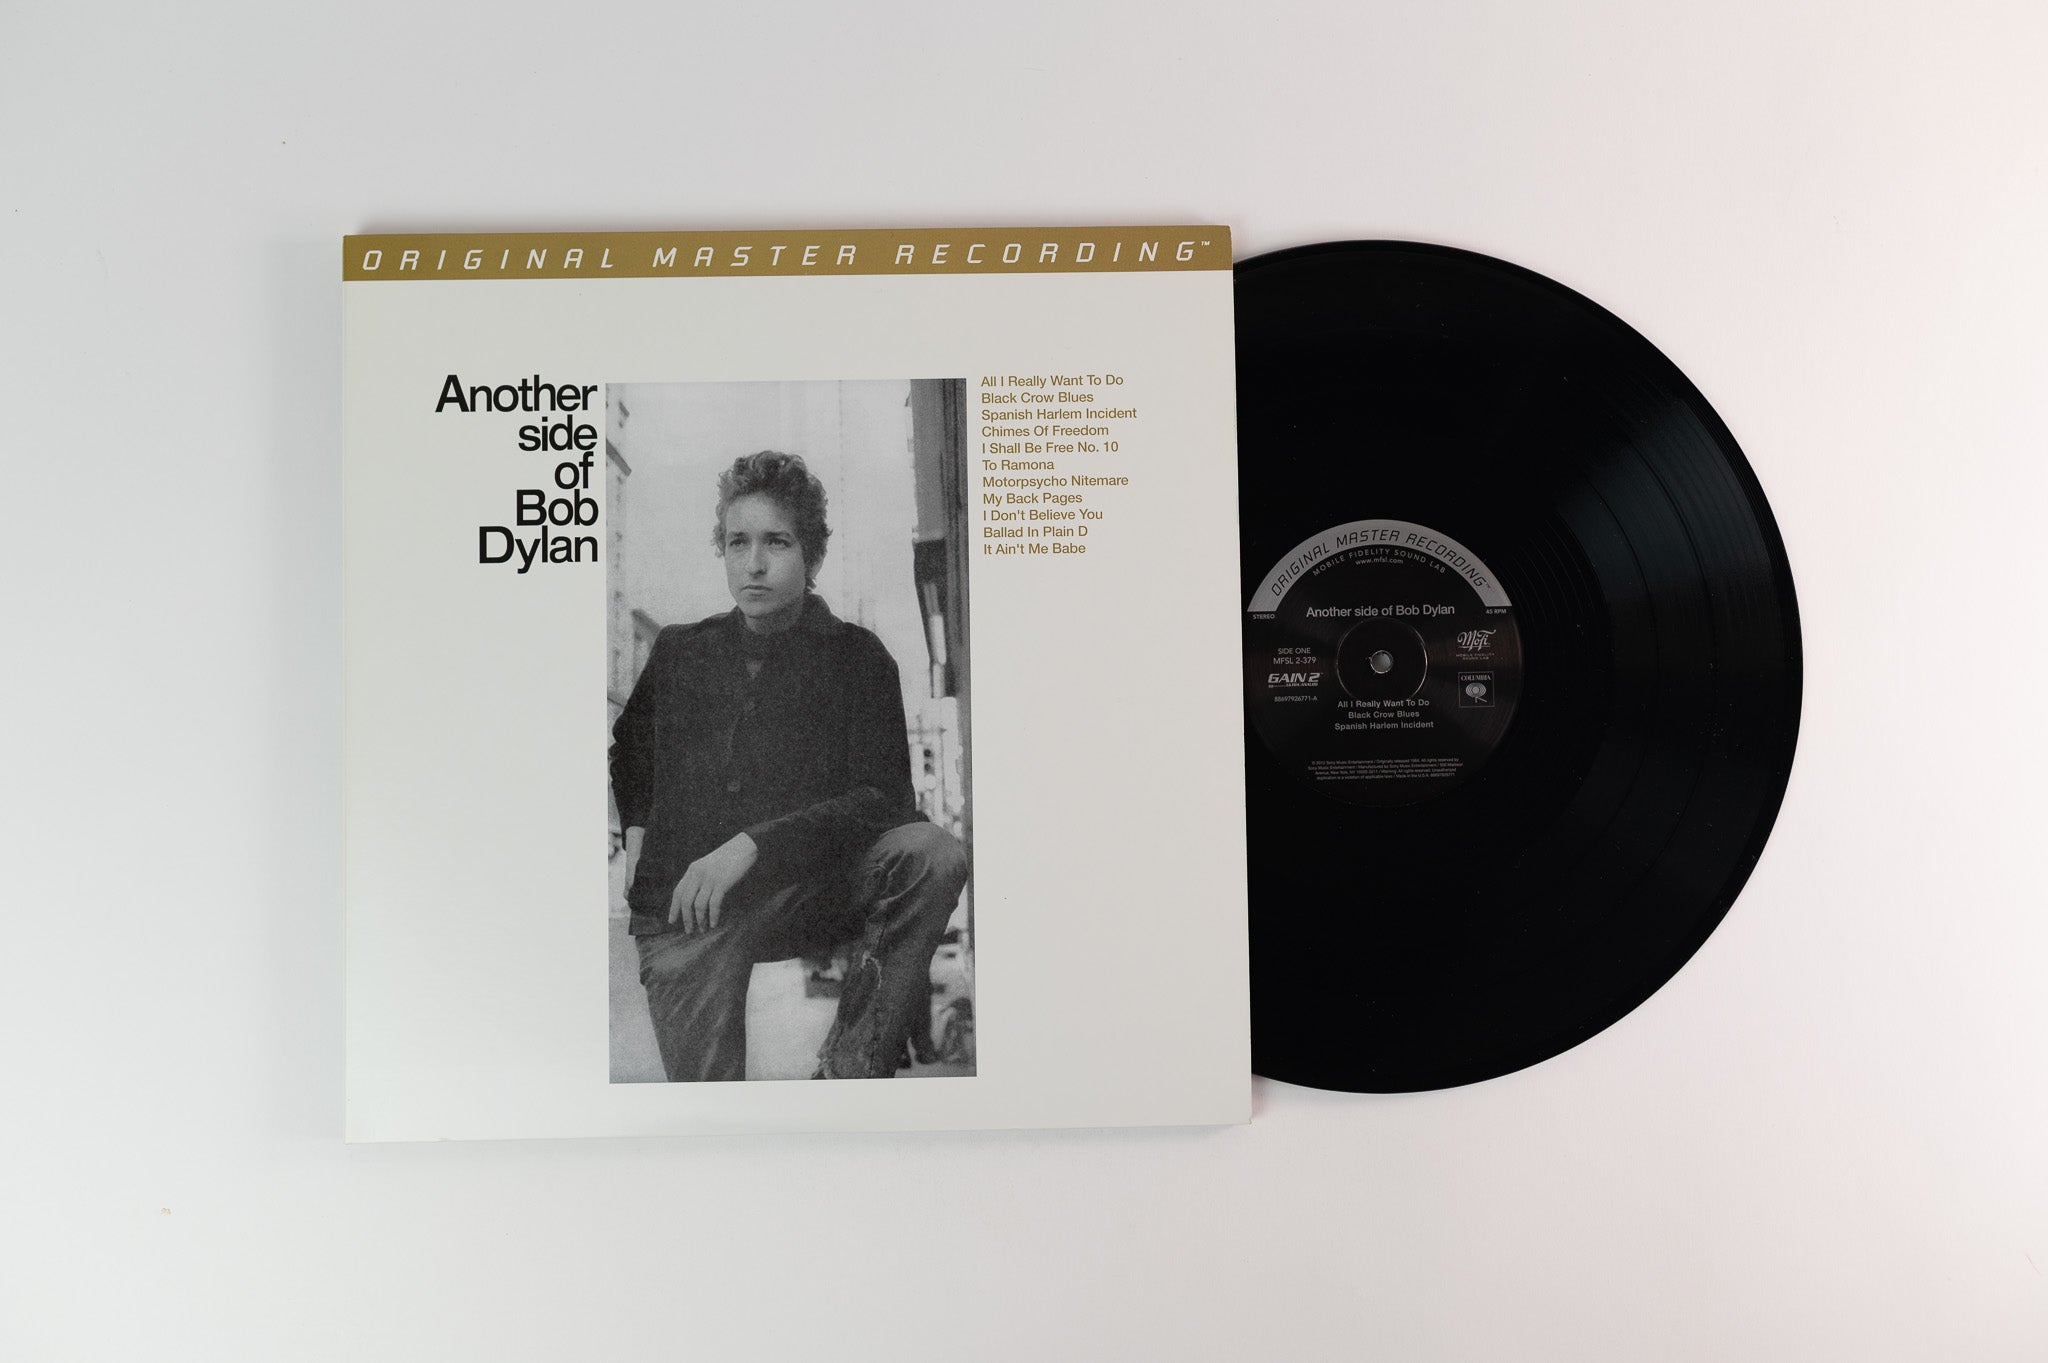 Bob Dylan - Another Side Of Bob Dylan Mobile Fidelity Sound Lab Stereo Reissue